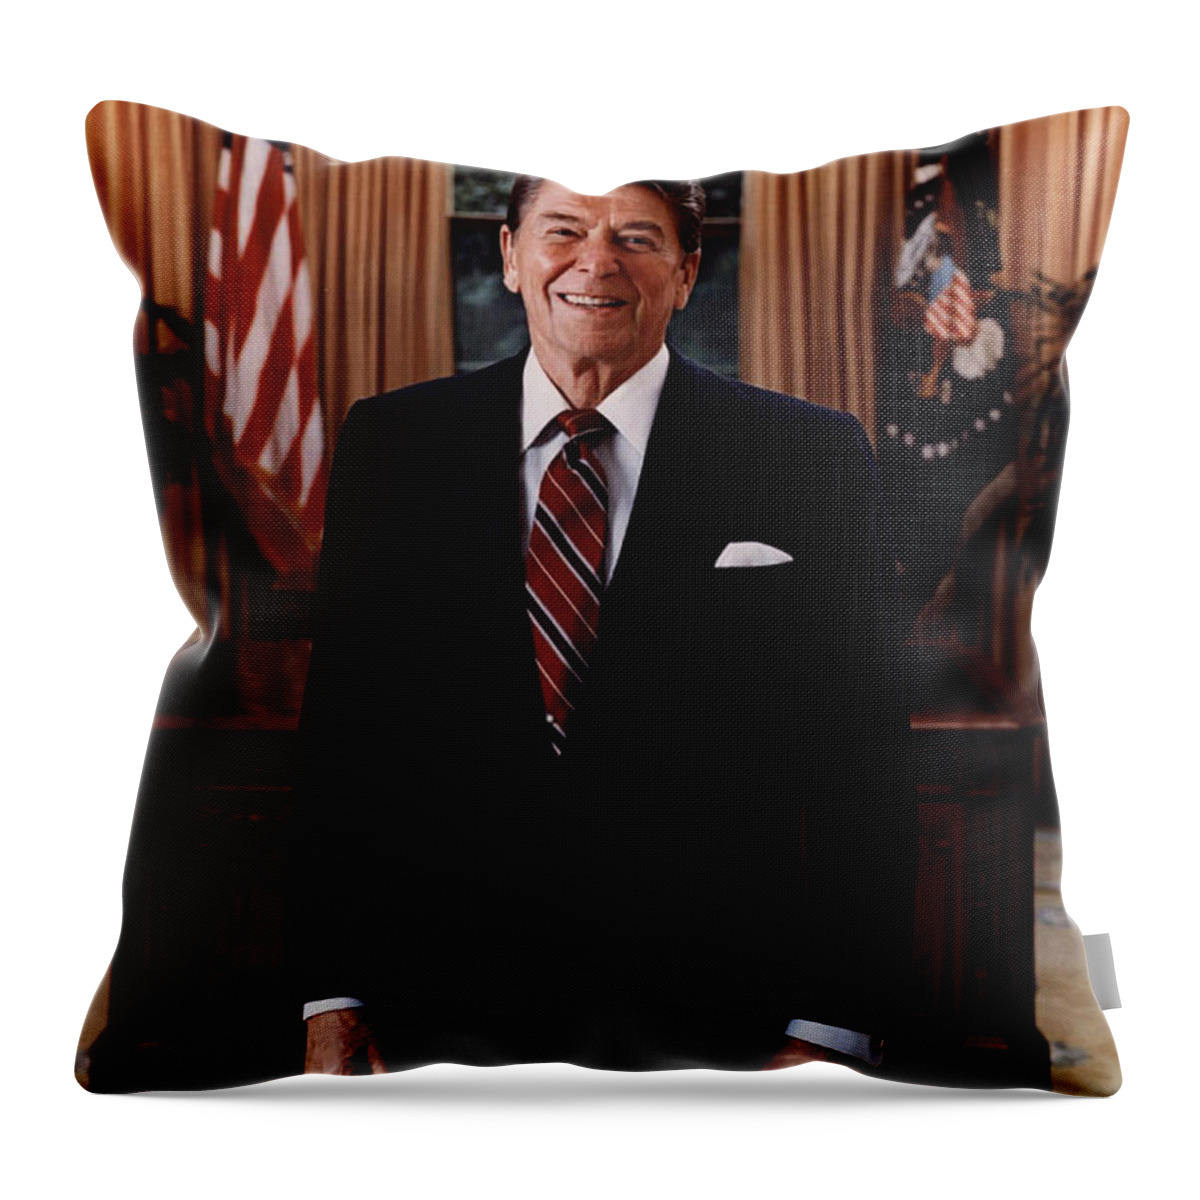 1985 Throw Pillow featuring the photograph Official Portrait Of President Ronald Reagan 1985 by Mountain Dreams